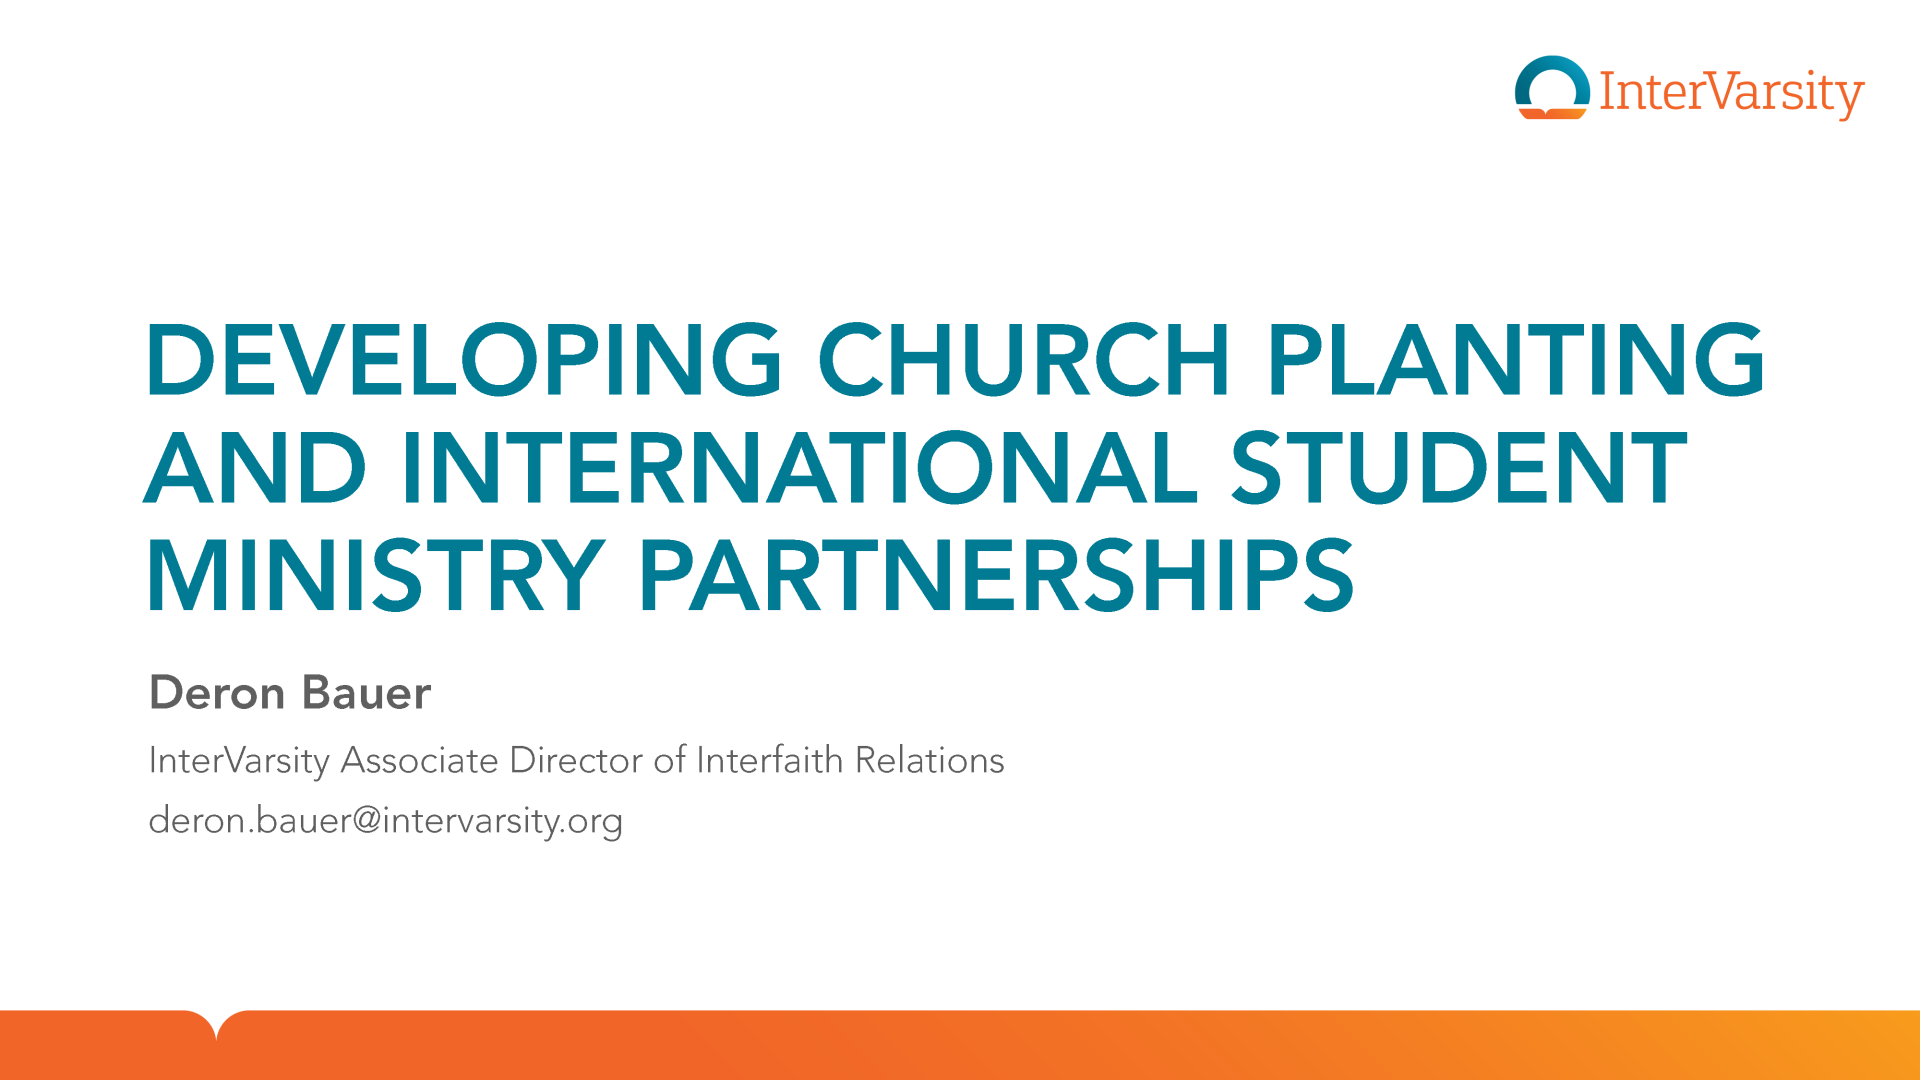 Developing church planting and international student ministry partnership slide 1